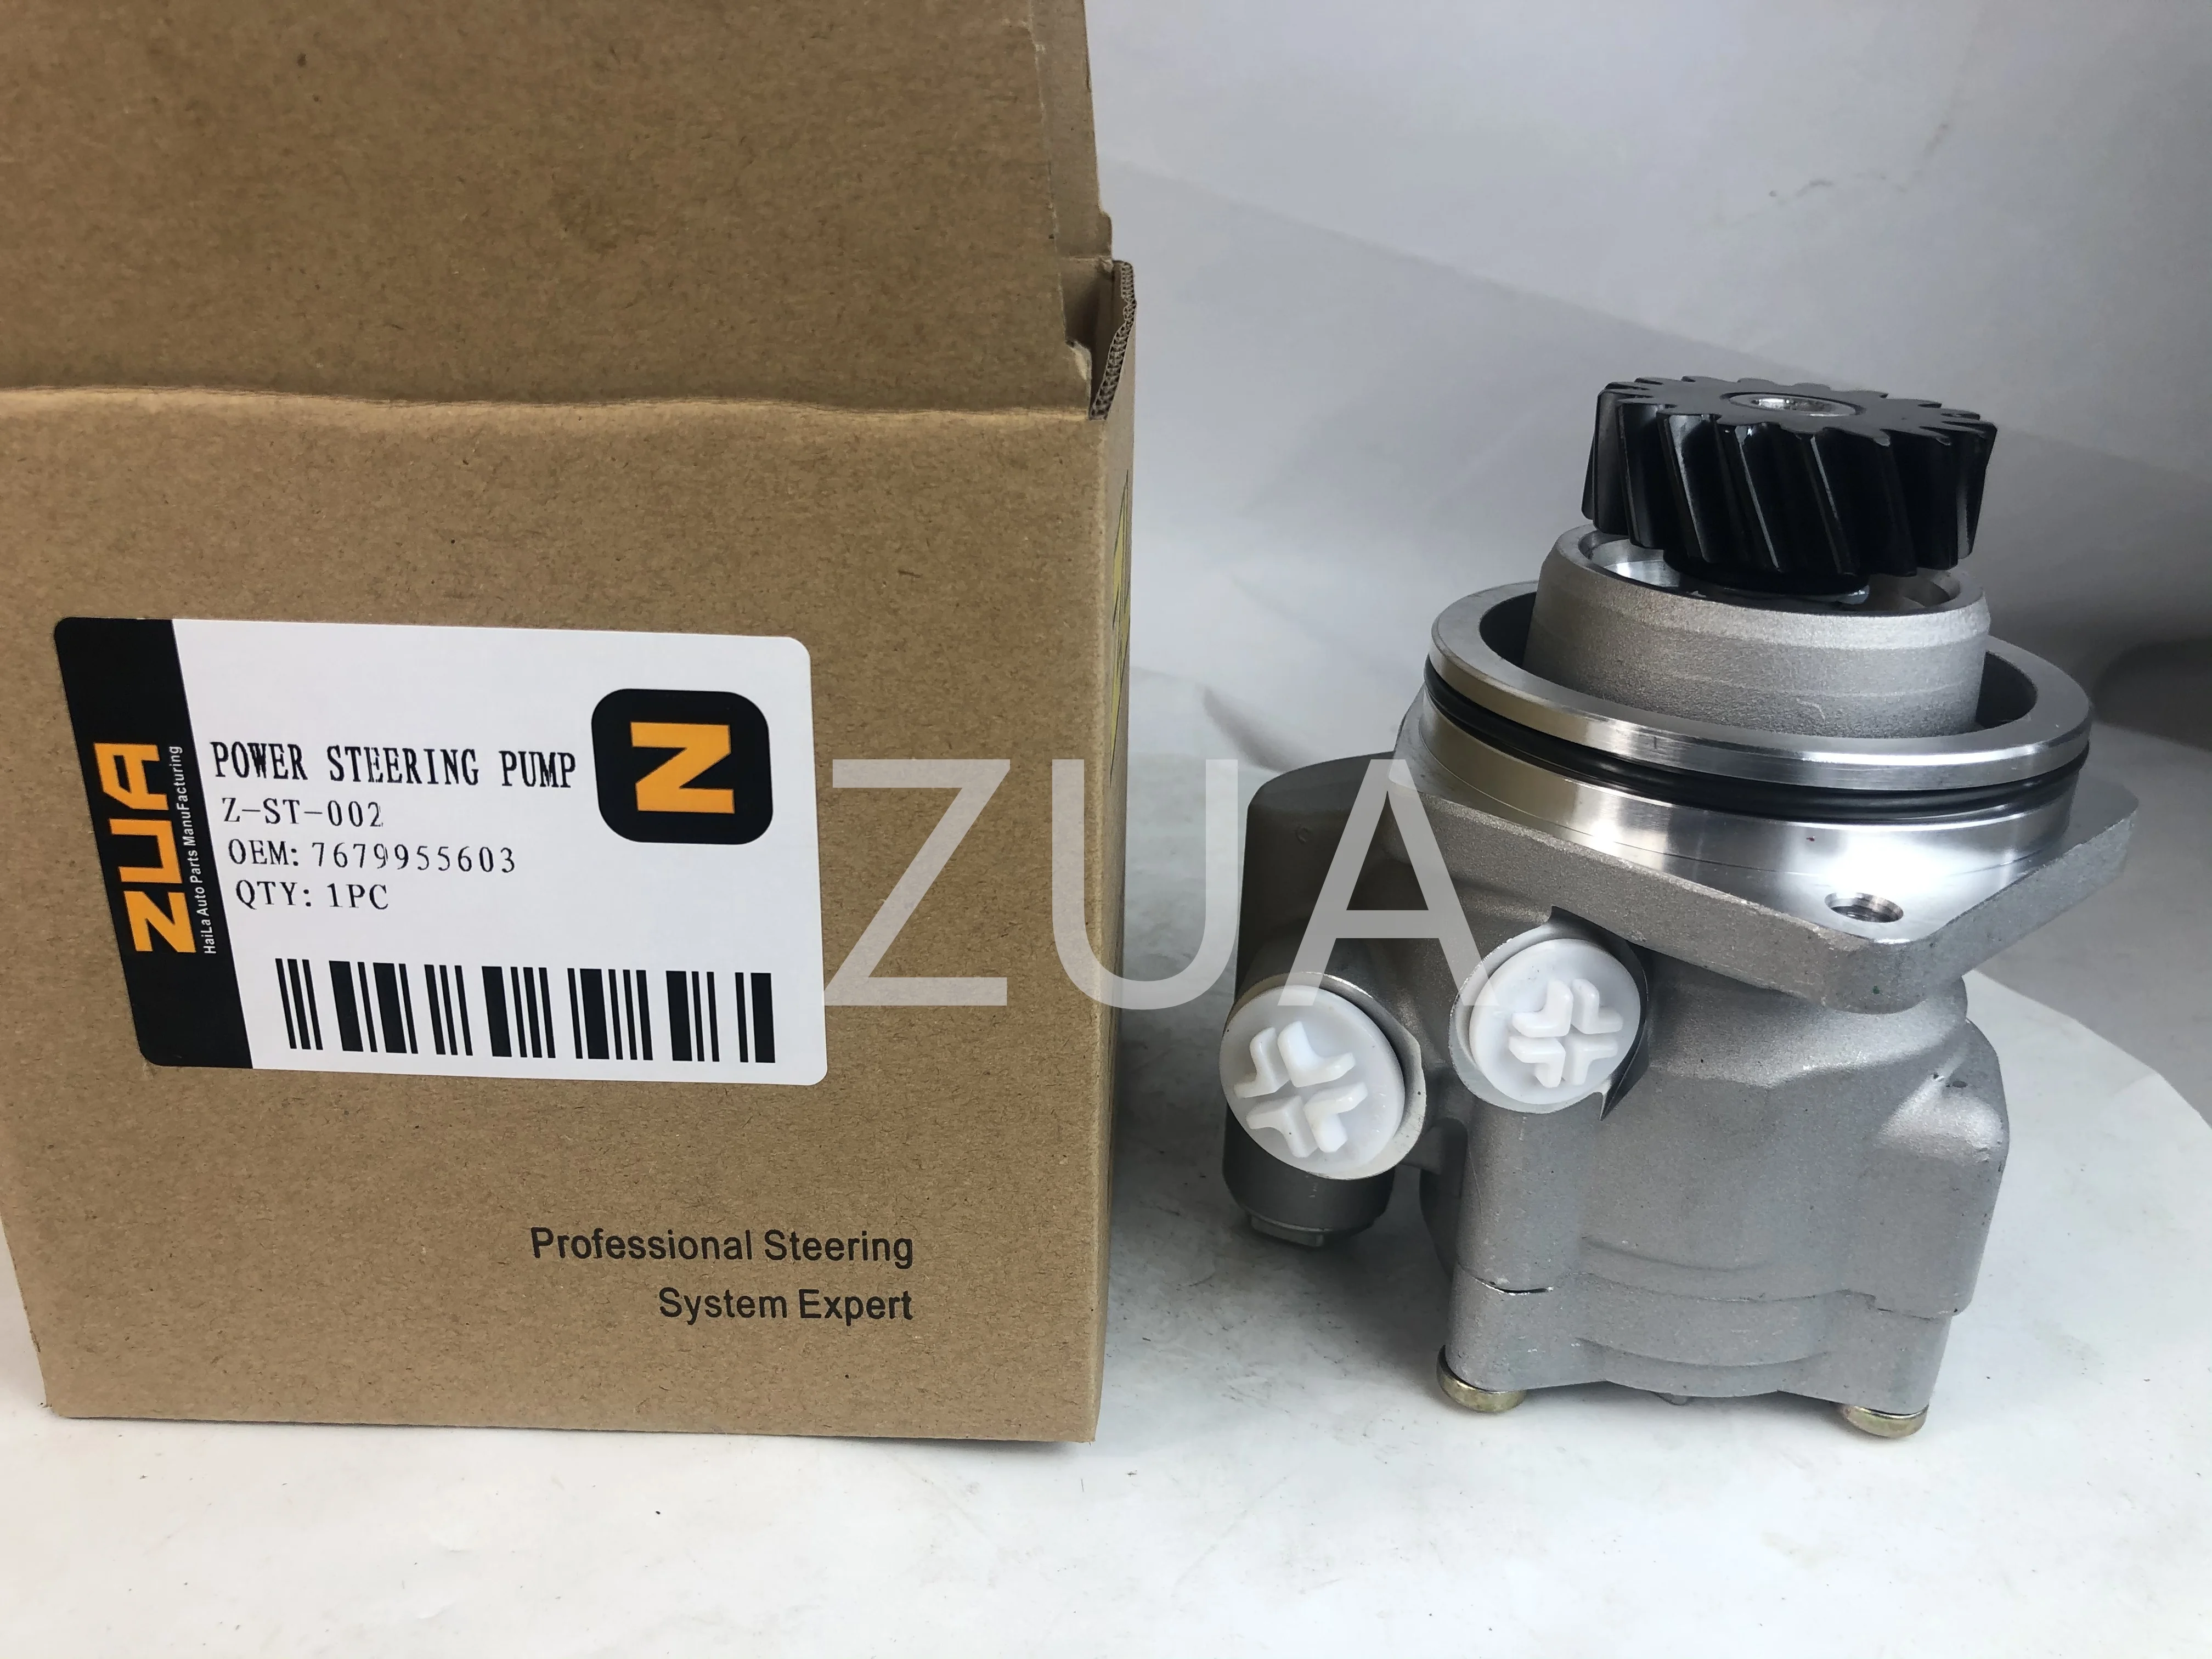 7679955603/9725478037 for STERY TRUCK Steerig Pump